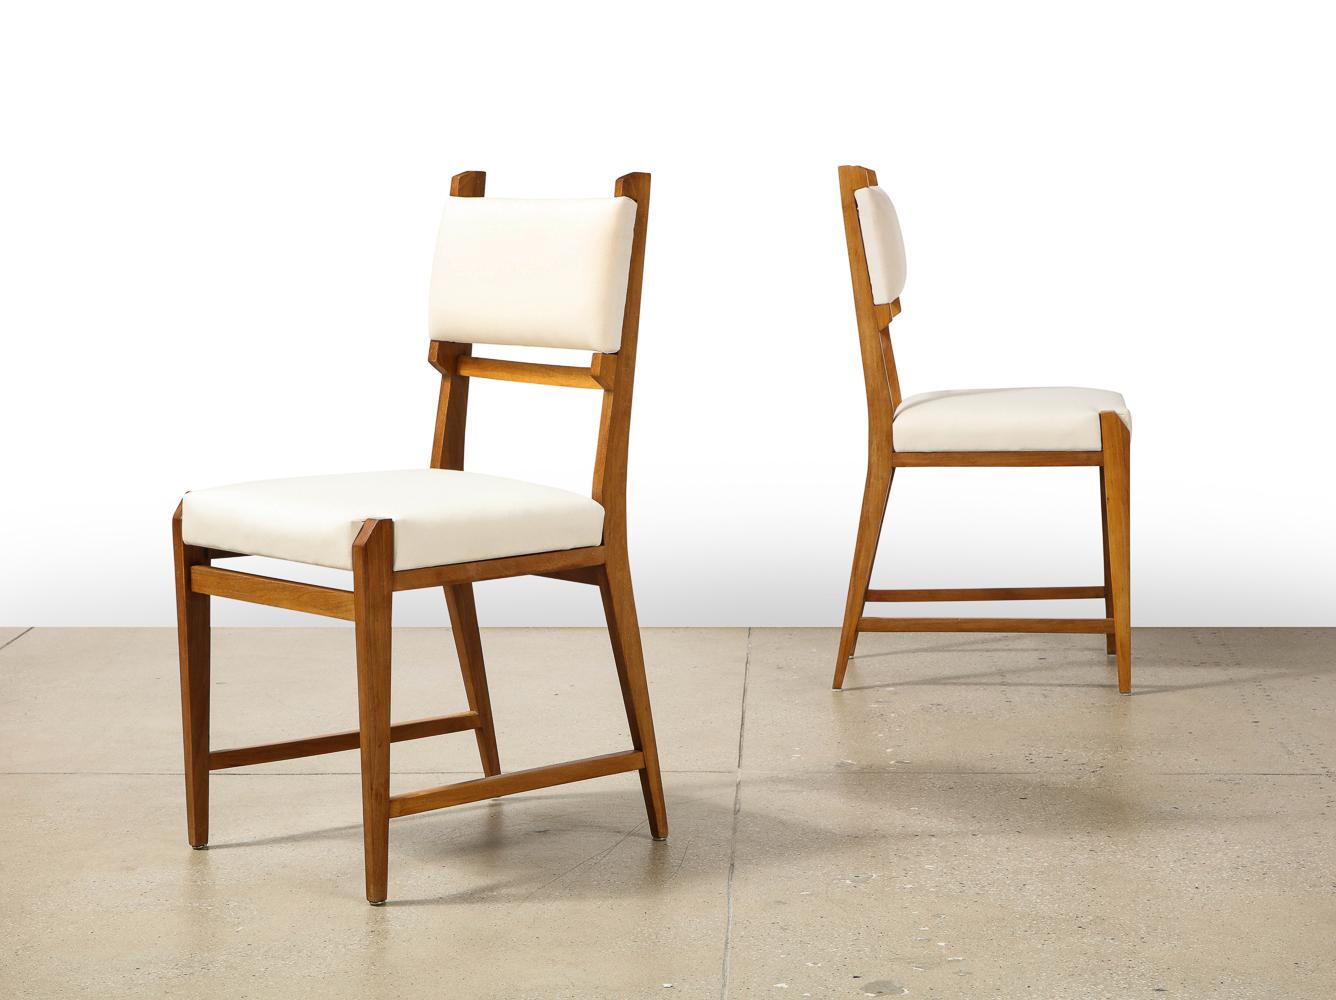 Rare Set of 6 Dining Chairs by Ico Parisi. Italian walnut, fabric. Produced by Fratelli Rizzi, Intimiano, Italy. Fantastic architectural form with rich wood structures. A rare custom set. 
Provenance: Gabriella Cozzi, Como, commissioned directly